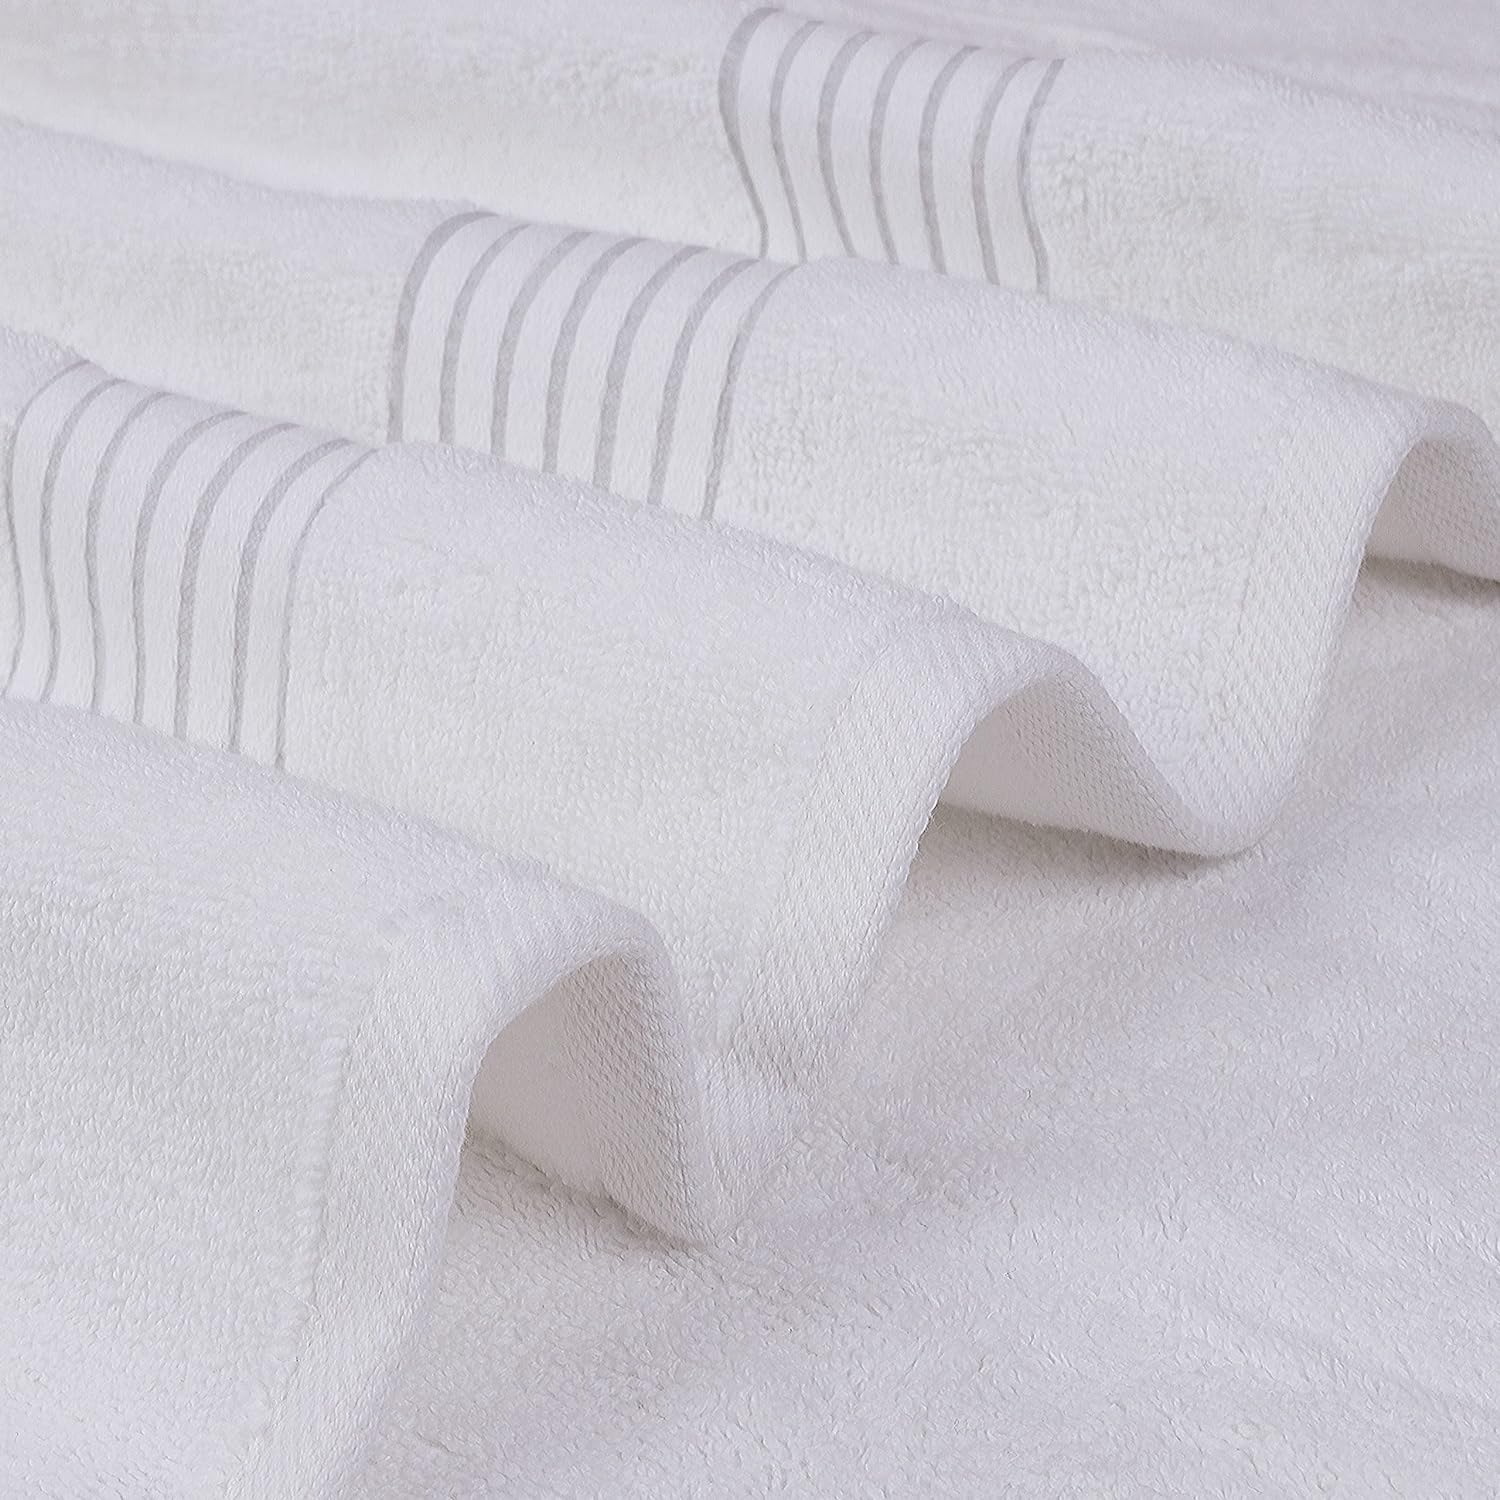 Utopia Towels - Bath Towels Set - Luxurious 600 gSM 100% Ring Spun cotton -  Quick Dry, Highly Absorbent, Soft Feel Towels, Perfe